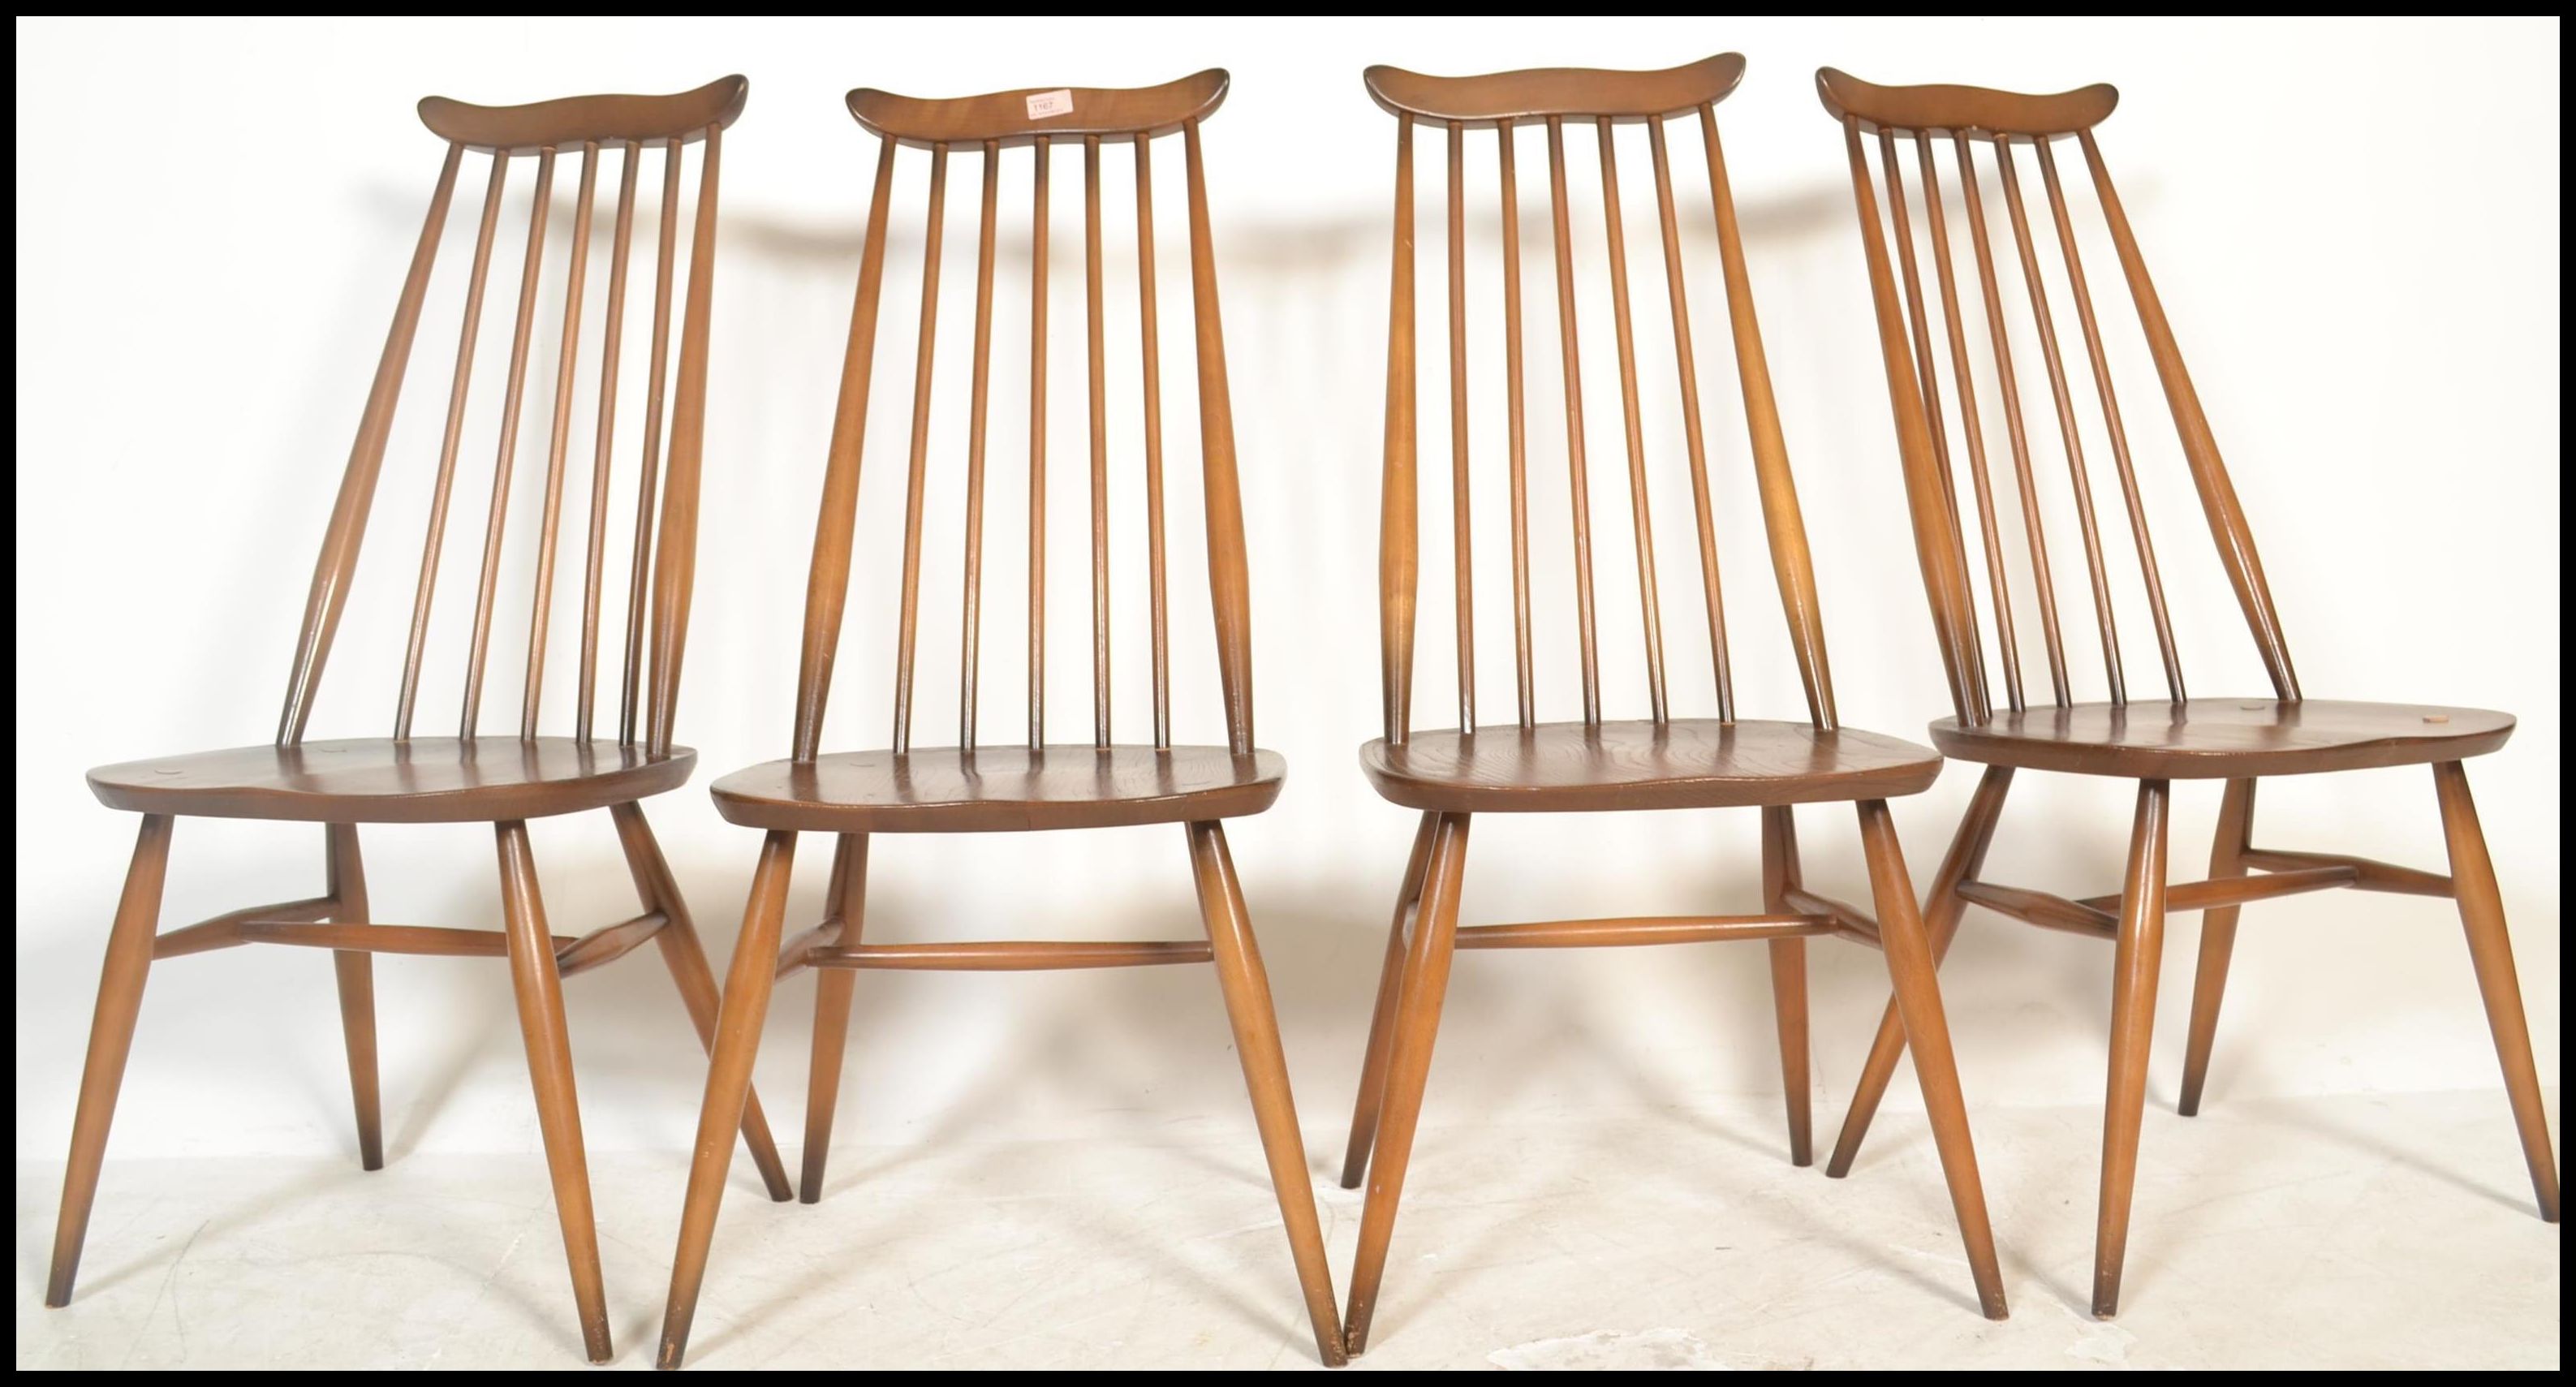 A set of four 20th century vintage Golden Dawn Ercol beech and elm stick back dining chairs,